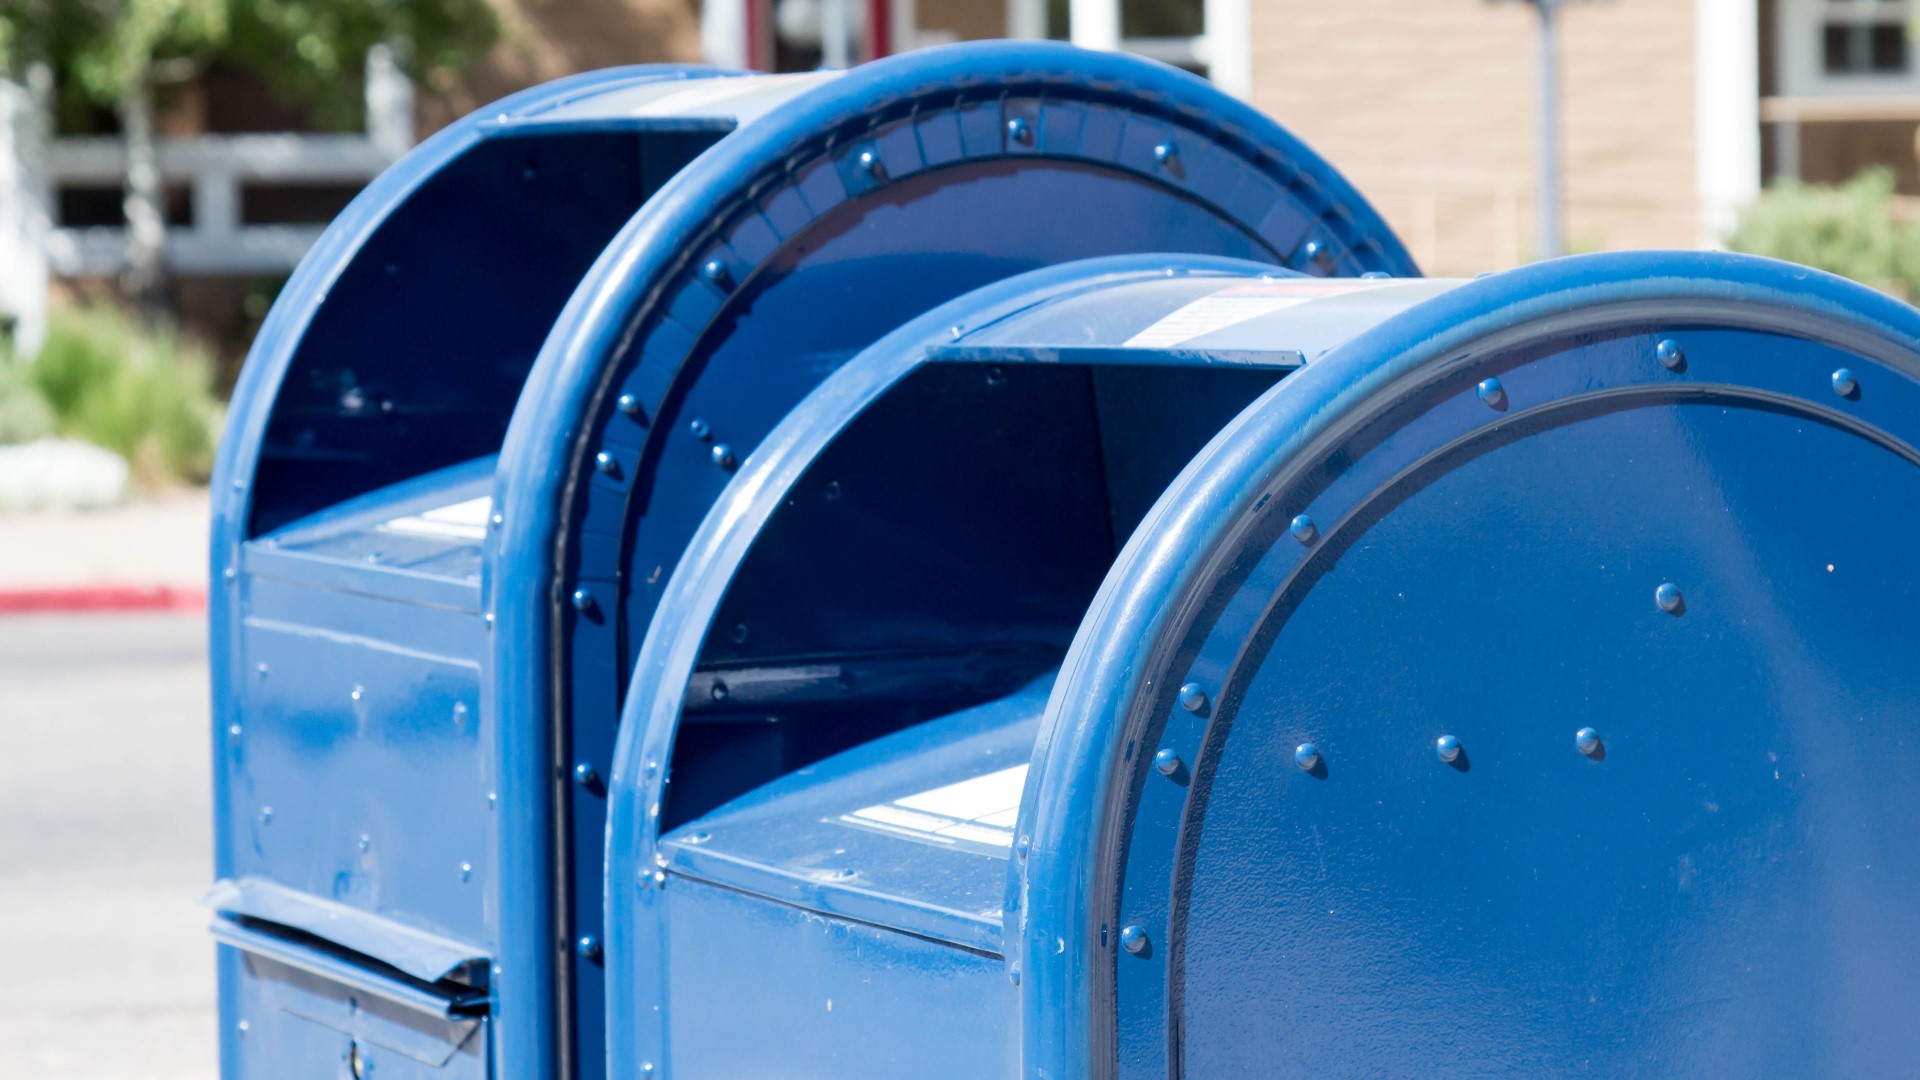 'I've never witnessed or experienced anything like that before the holidays, tax season.' Some USPS customers report finding blue mailboxes filled to the top.